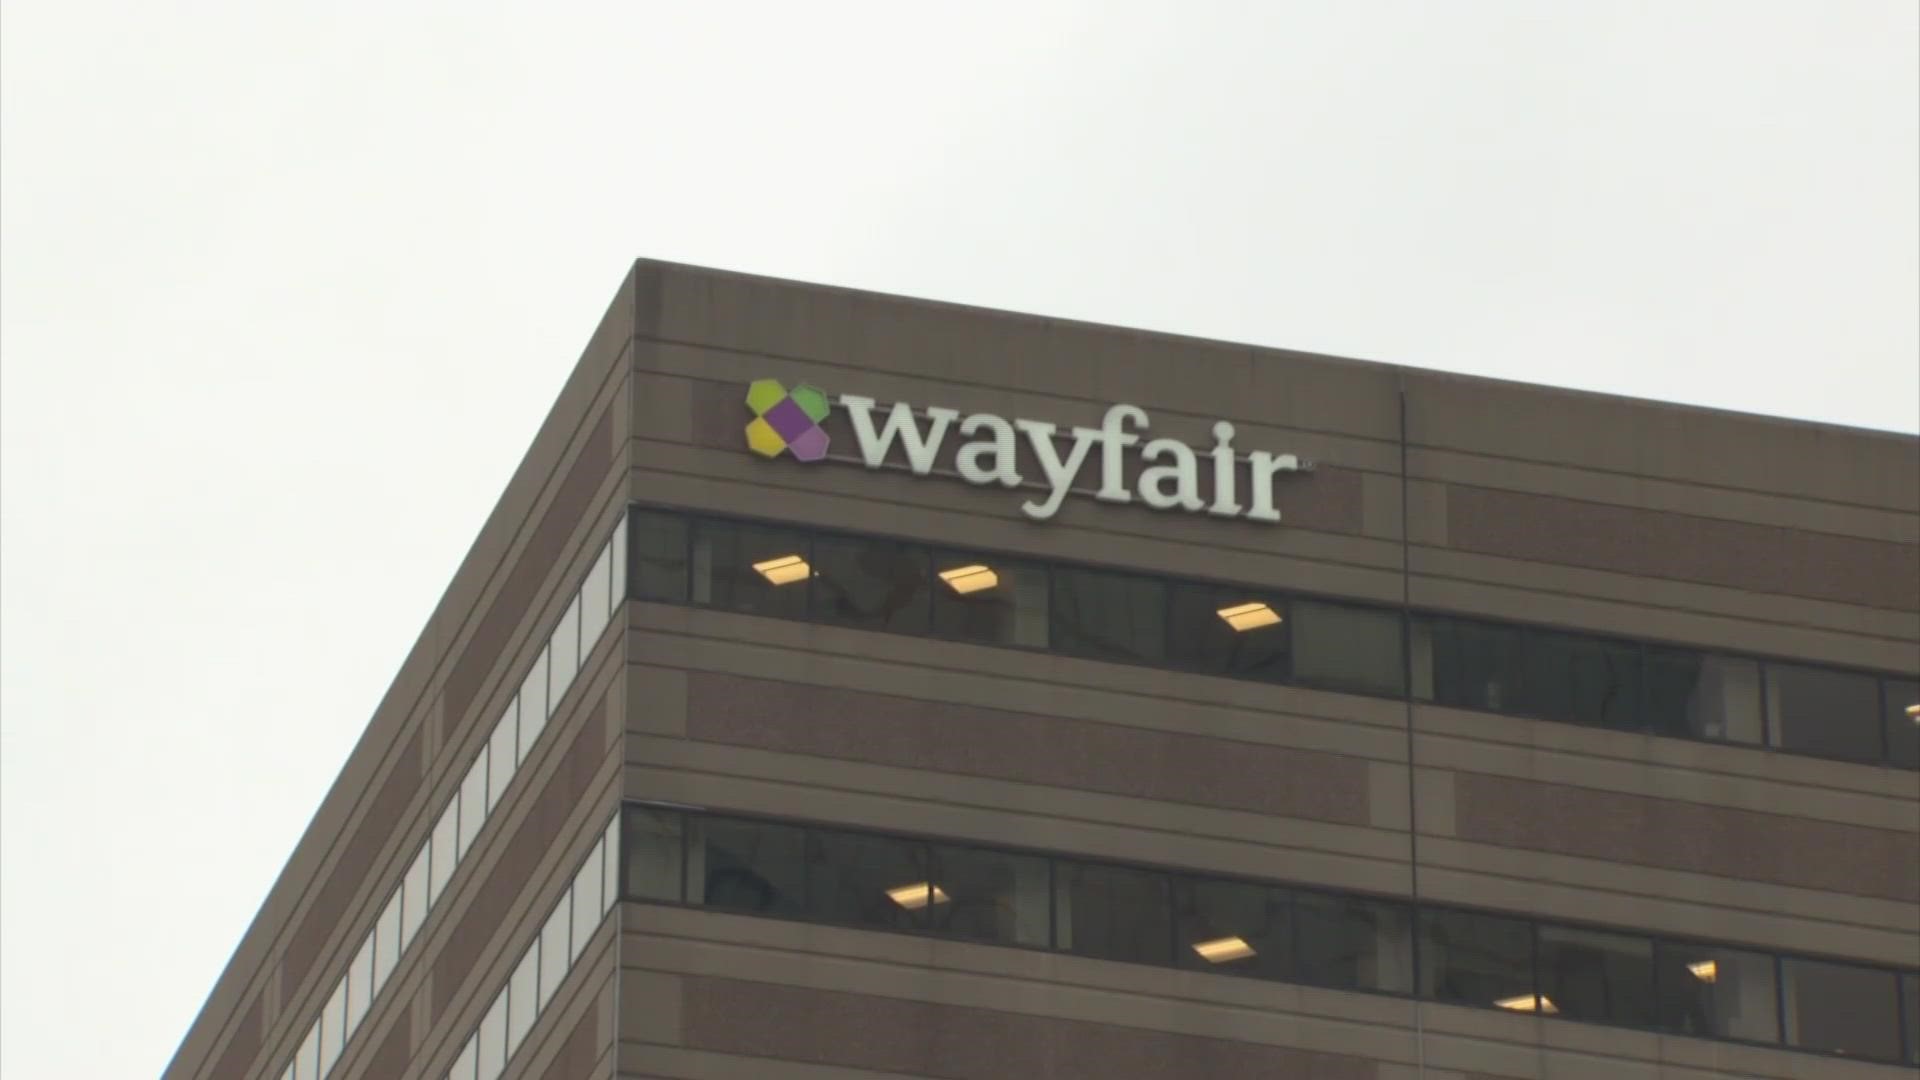 Wayfair said it's no longer pursuing Houston, saying the decision is due to changes in its business.